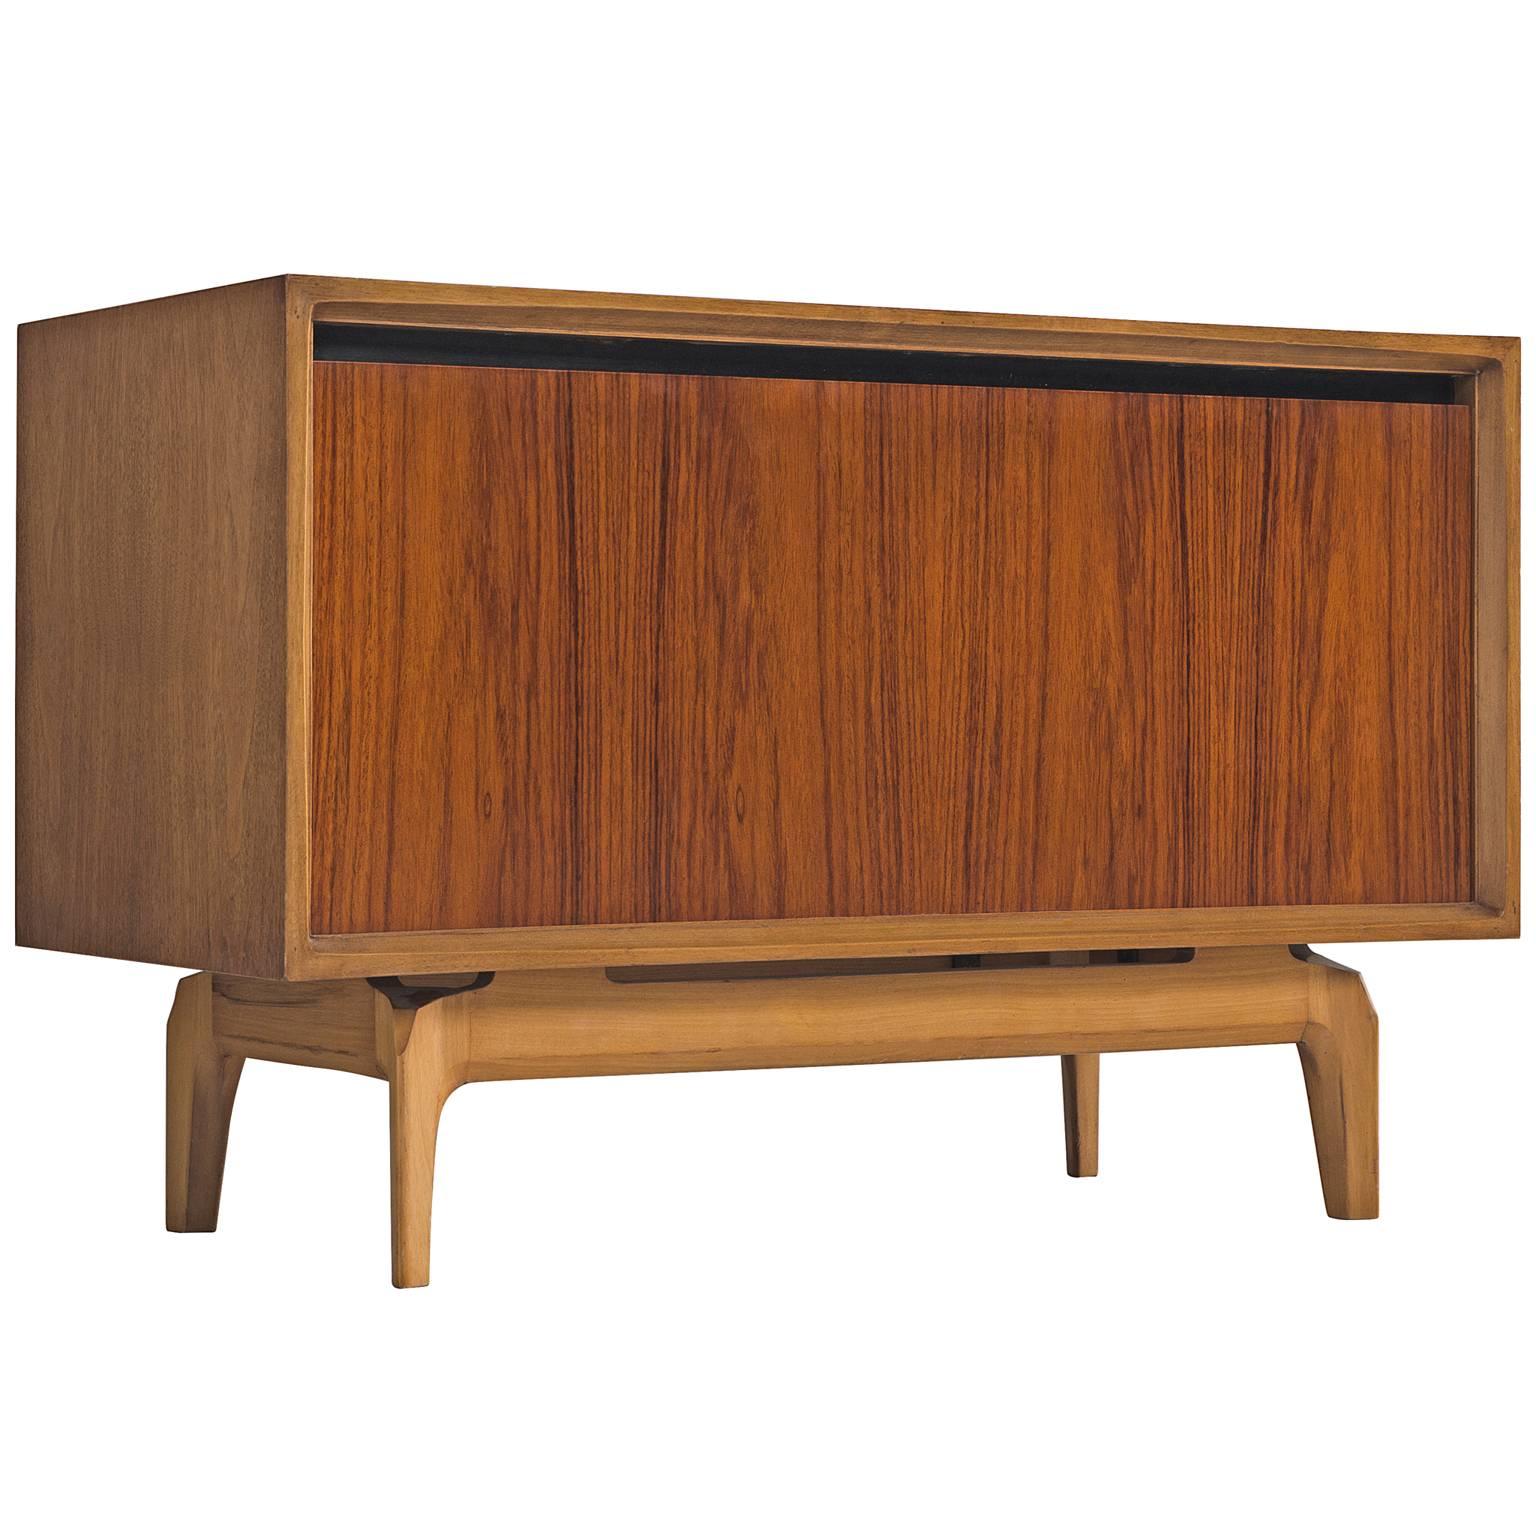 De Coene 'Madison' Credenza in Rosewood and Walnut